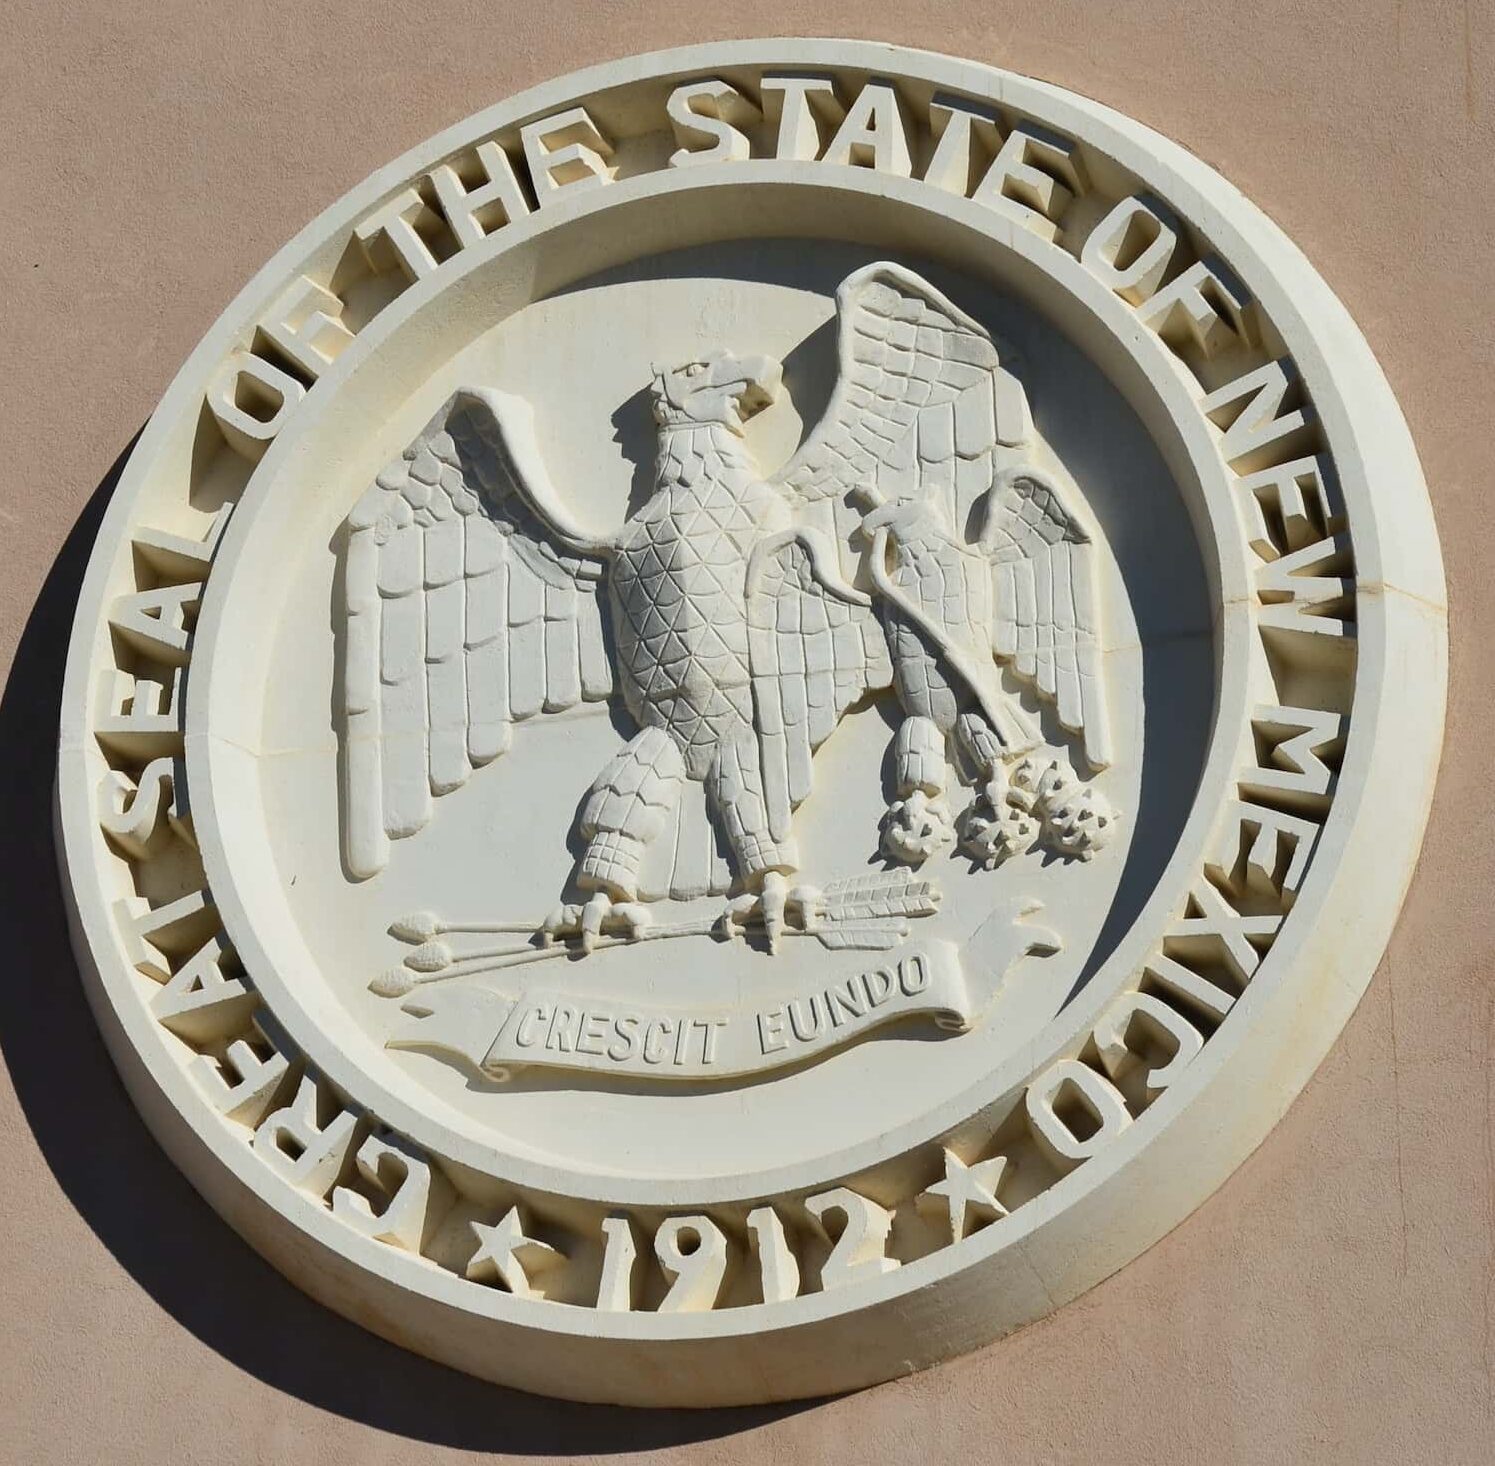 Seal of New Mexico at the New Mexico State Capitol